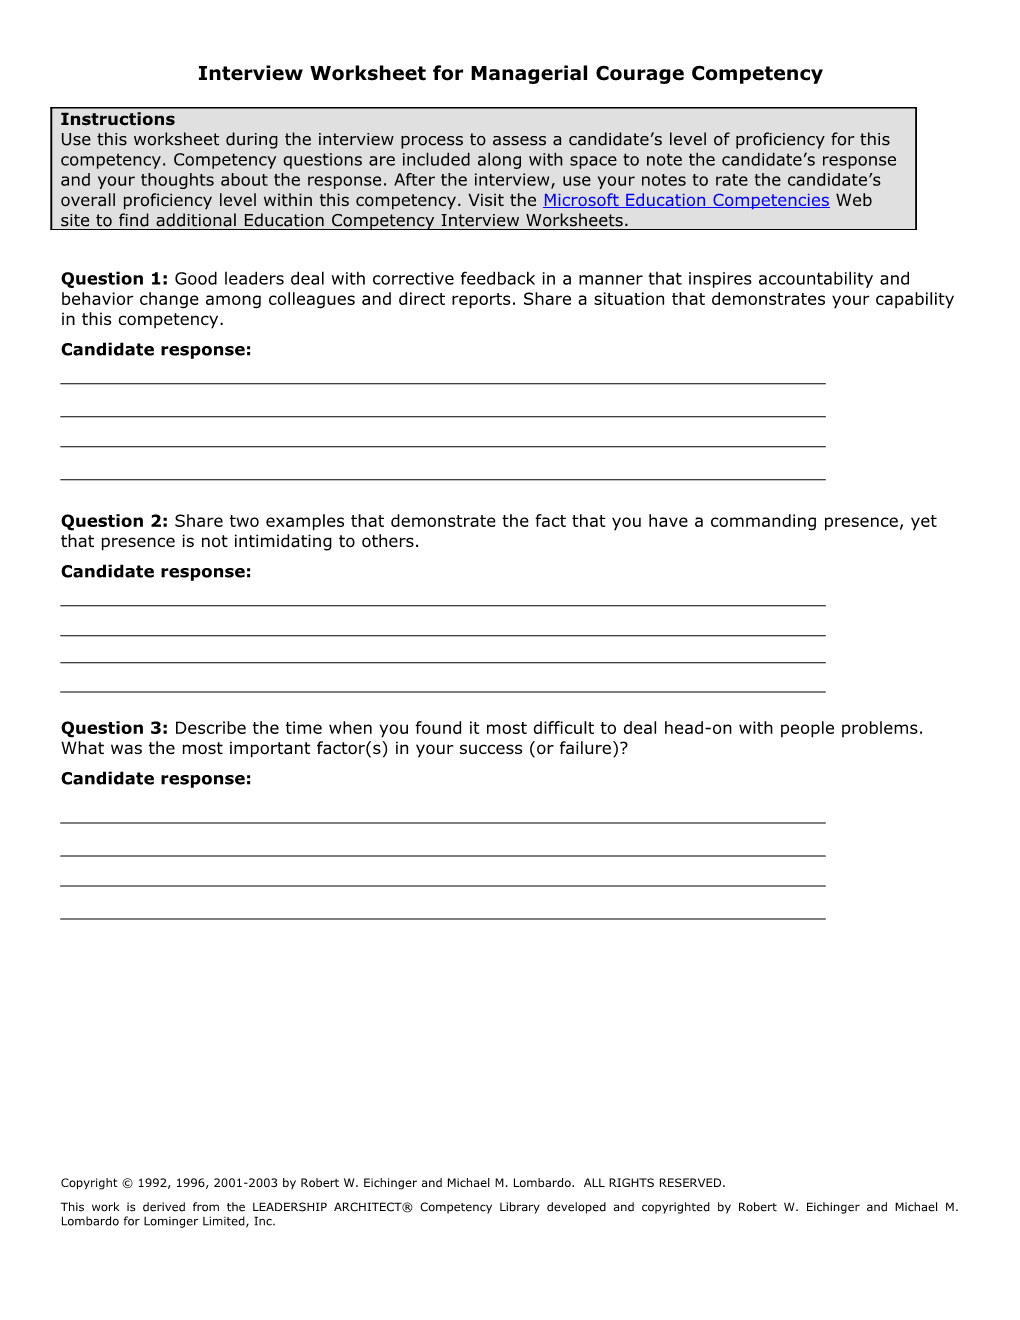 Interview Worksheet for Managerial Courage Competency